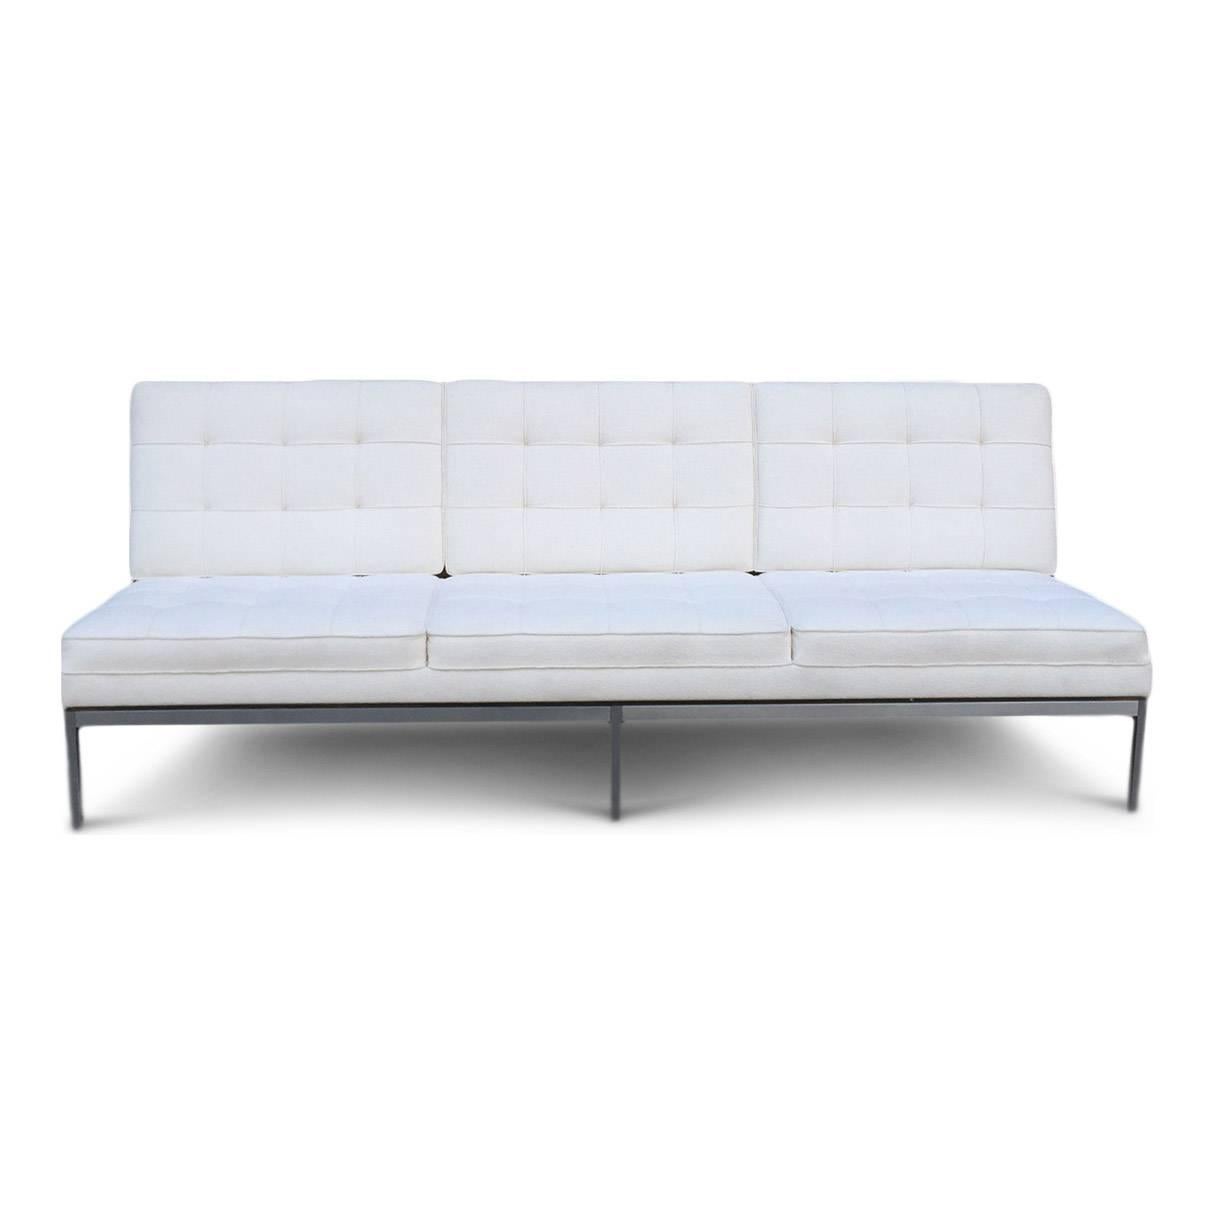 Florence Knoll for Knoll sofa, previously reupholstered in white wool Knoll fabric on a brushed steel base. It is an icon of Florence Knoll's clean Mid-Century Modern design.

This sofa with the angled bars at the back of the sofa was only